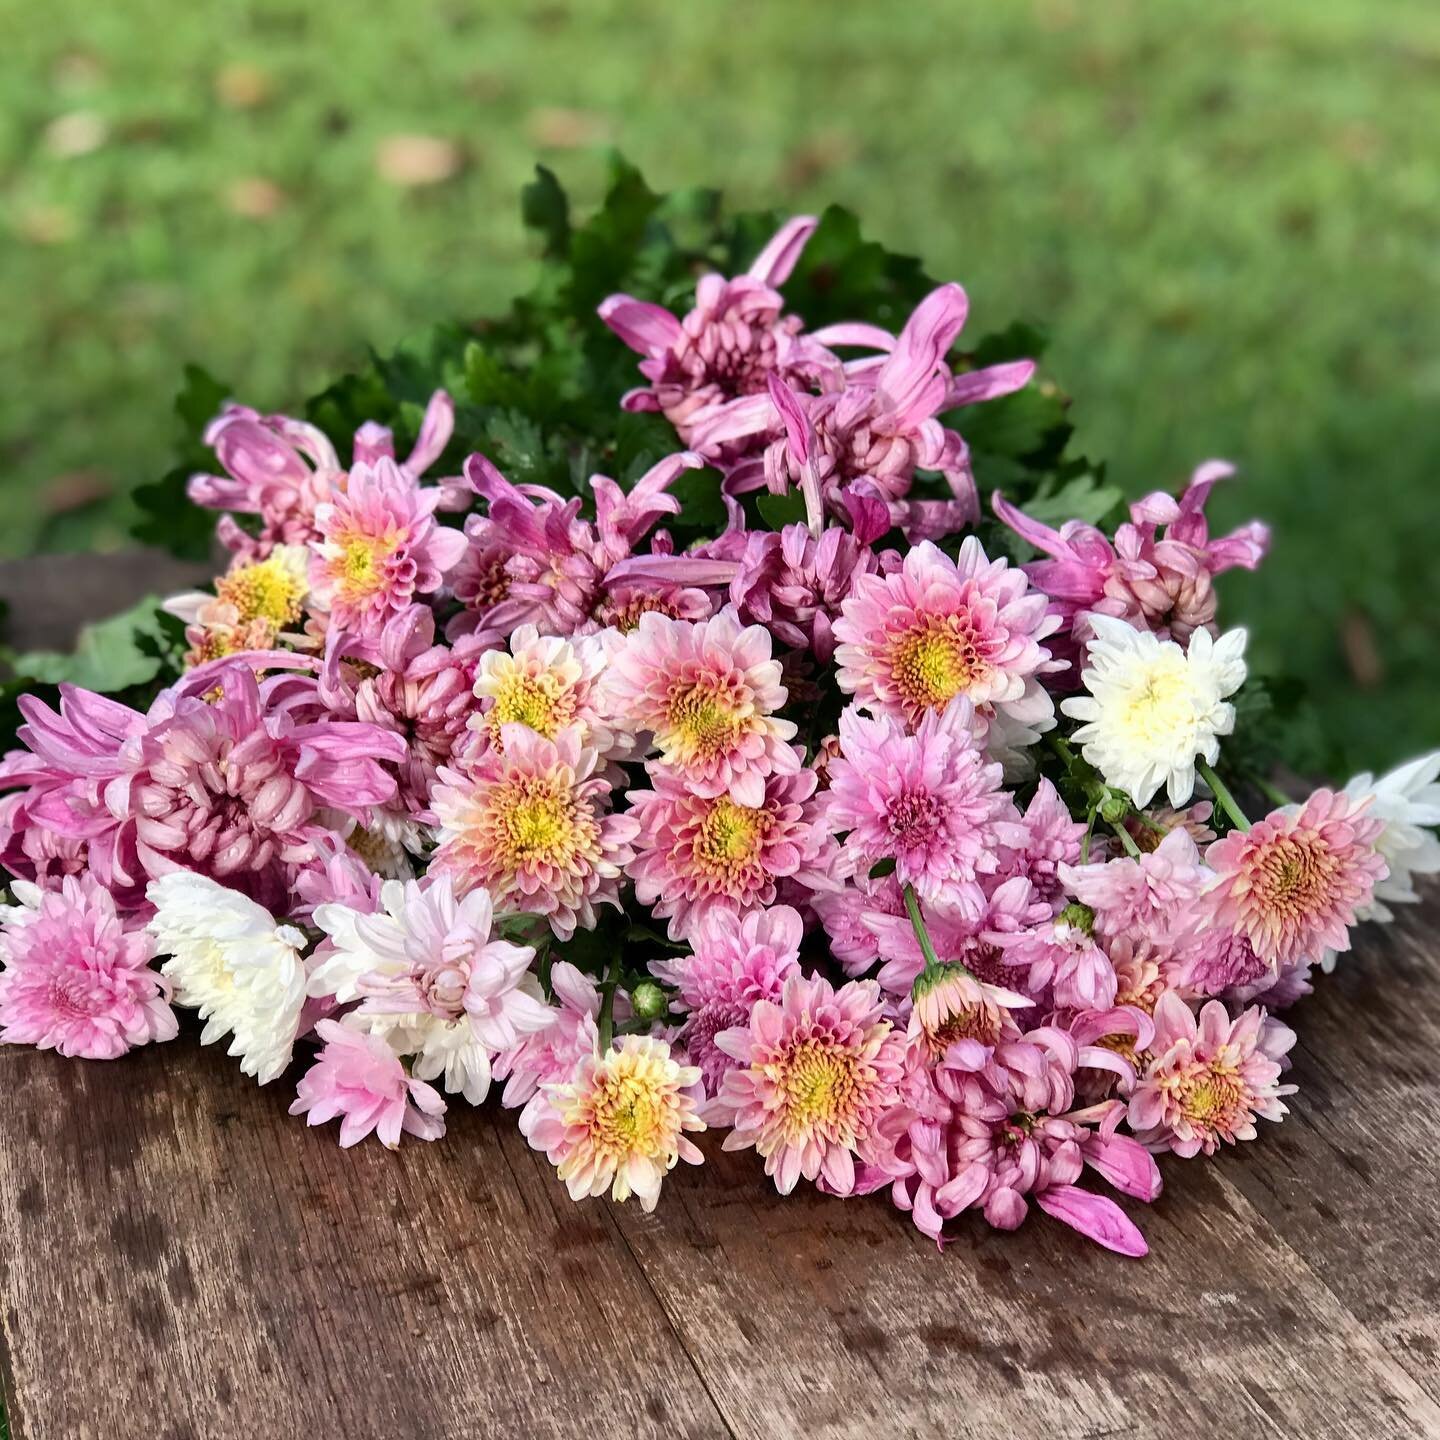 My chrysanthemums are starting to flower. Right on time for Mother&rsquo;s Day.

I&rsquo;m often asked &lsquo;What is my favourite flower?&rsquo; and my answer is always &lsquo;Chrysanthemums&rsquo;. 

I don&rsquo;t think people expect to hear that.
